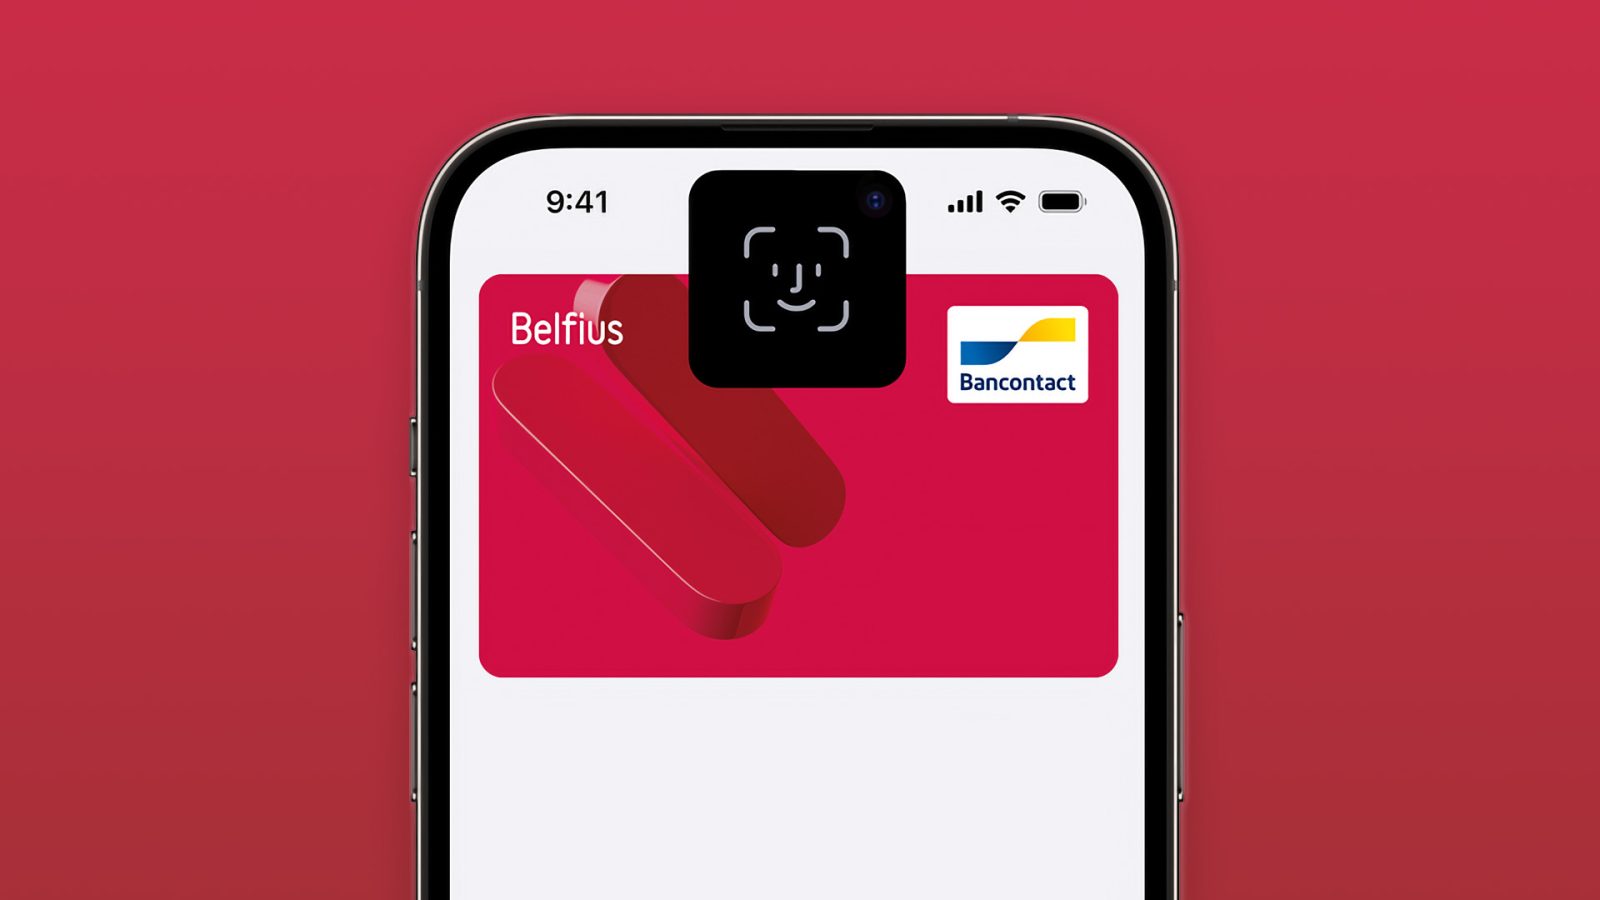 Belfius brings Apple Pay support to Bancontact card holders in Belgium